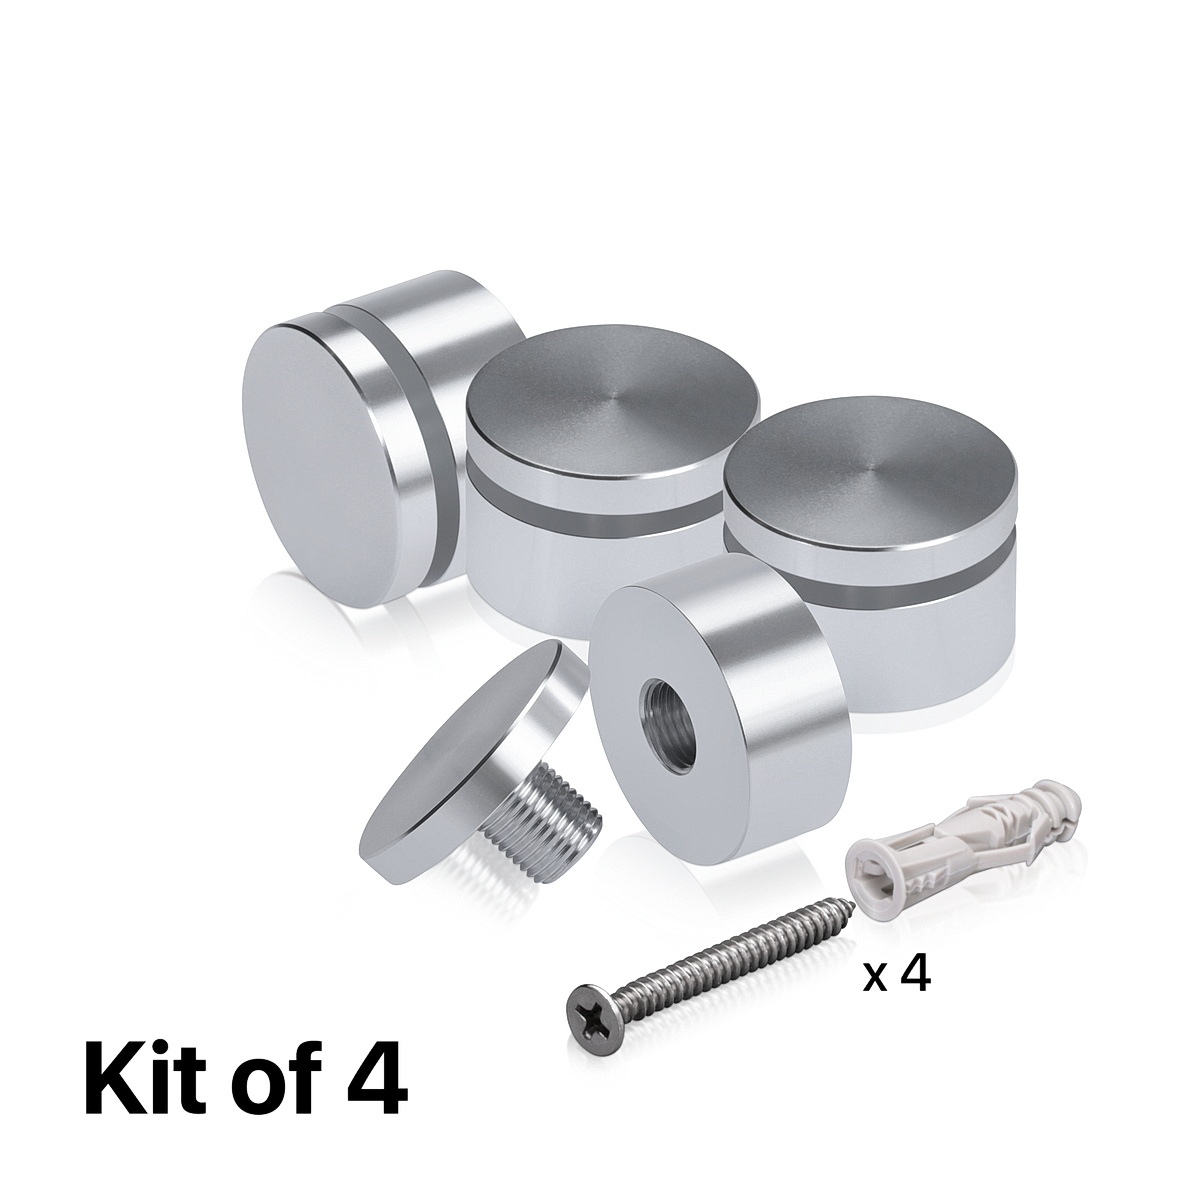 (Set of 4) 1-1/4'' Diameter X 1/2'' Barrel Length, Affordable Aluminum Standoffs, Silver Anodized Finish Standoff and (4) 2216Z Screws and (4) LANC1 Anchors for concrete/drywall (For Inside/Outside) [Required Material Hole Size: 7/16'']